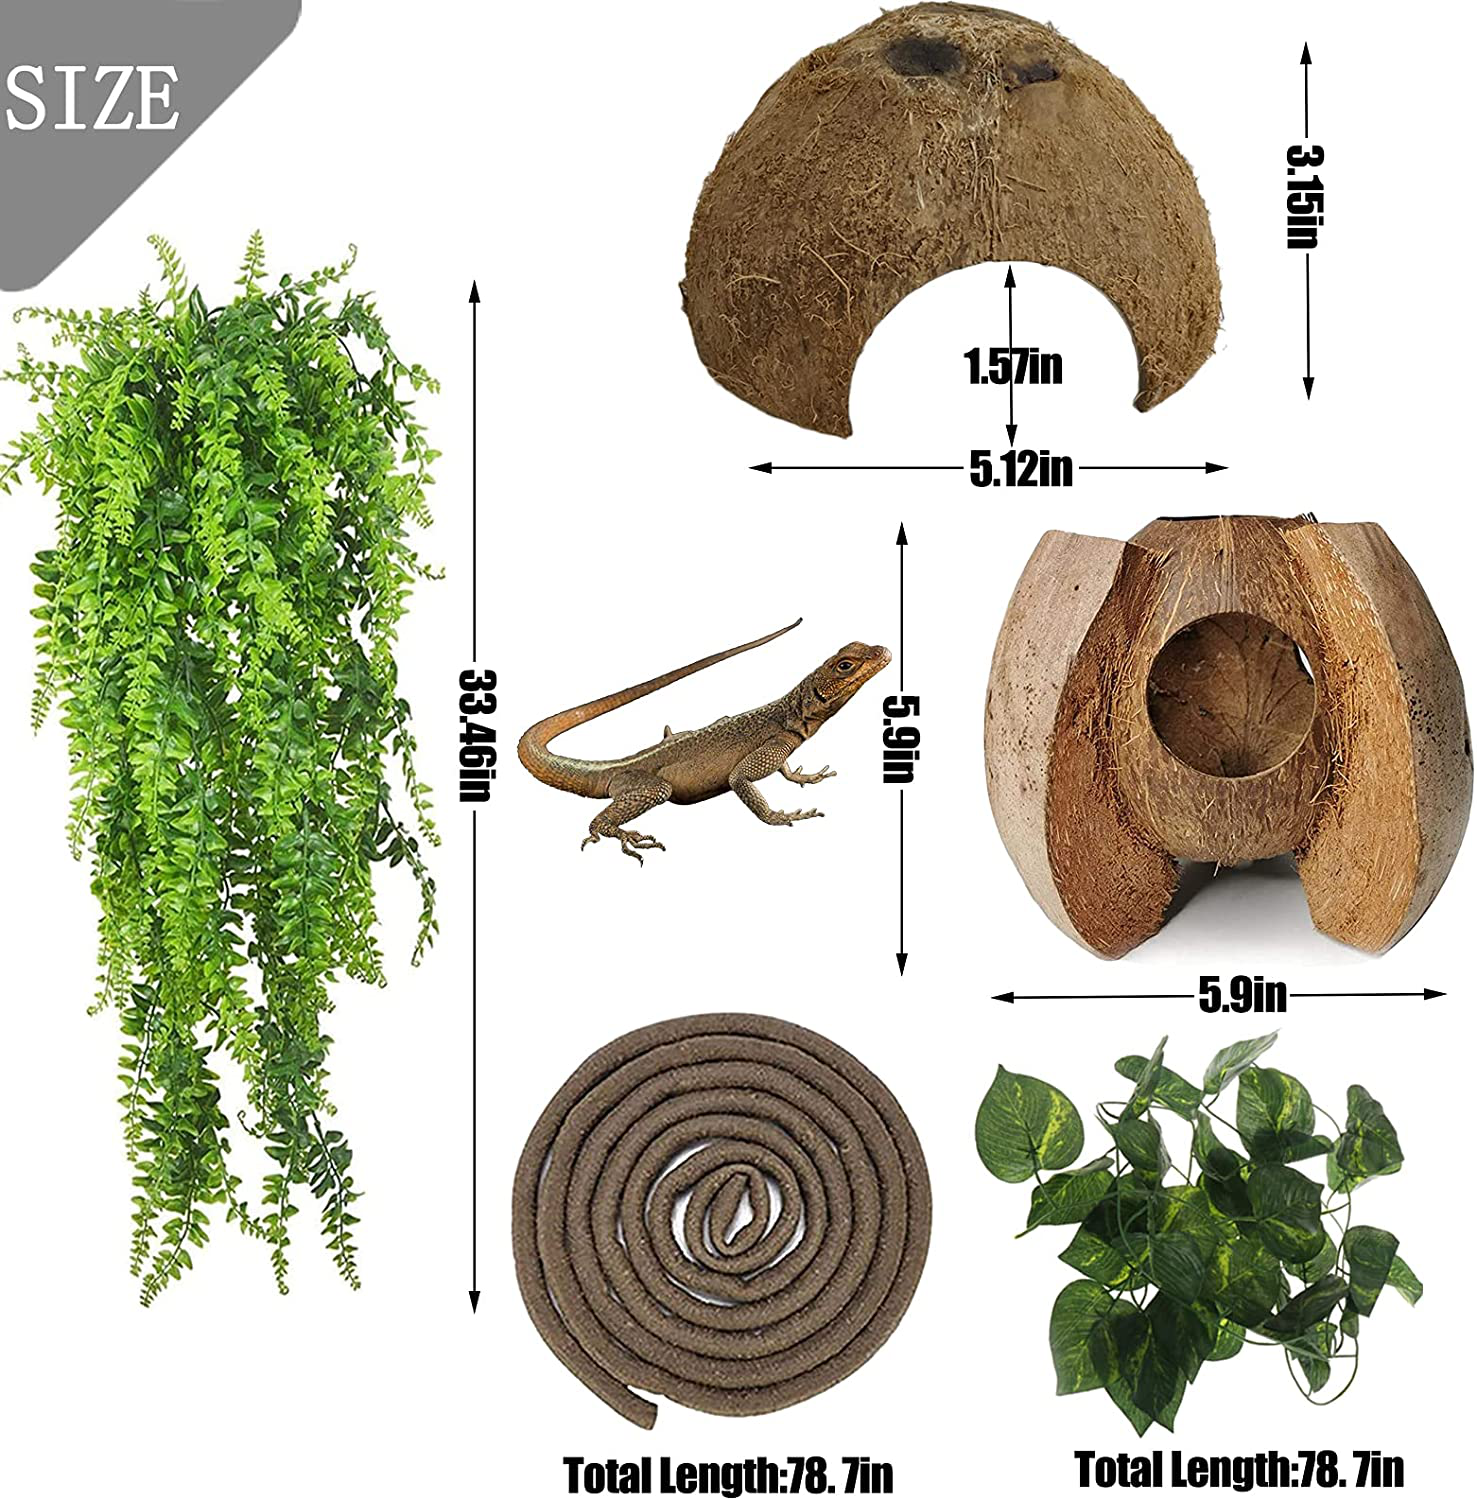 Hamiledyi Reptile Coconut Shell Hideout 5 Pack Lizard Coco Hut Durable Cave Habitat Jungle Climber Vines Flexible Plants Gecko Tank Accessories Decor for Chameleons Spiders Snakes Climbing Toys Animals & Pet Supplies > Pet Supplies > Small Animal Supplies > Small Animal Habitat Accessories Hamiledyi   